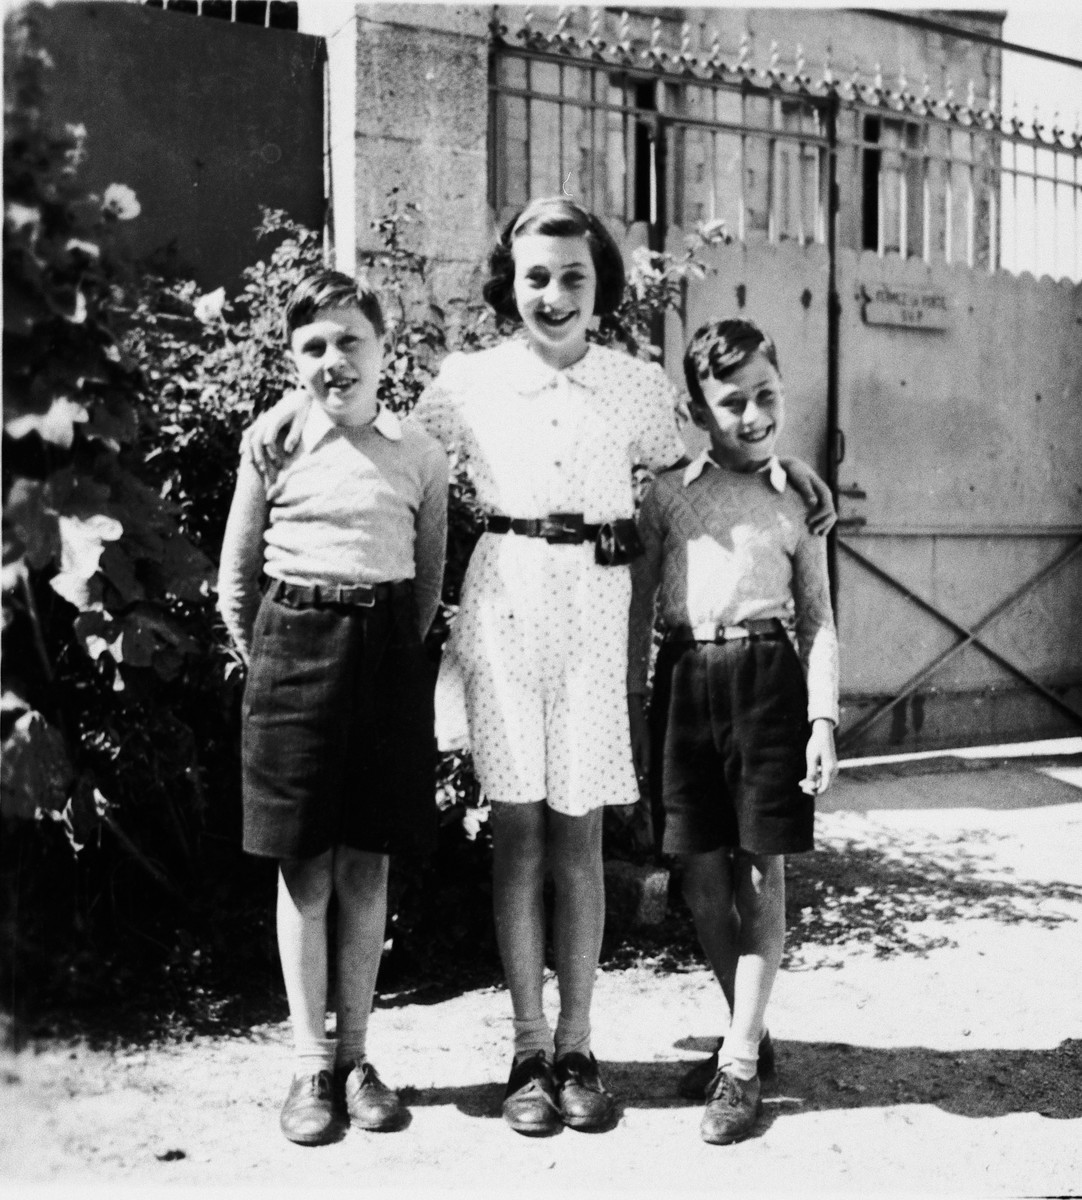 Three Jewish siblings pose outside their home in Gueret.

Pictured are Marianne, Pierre and Louis Schwab.